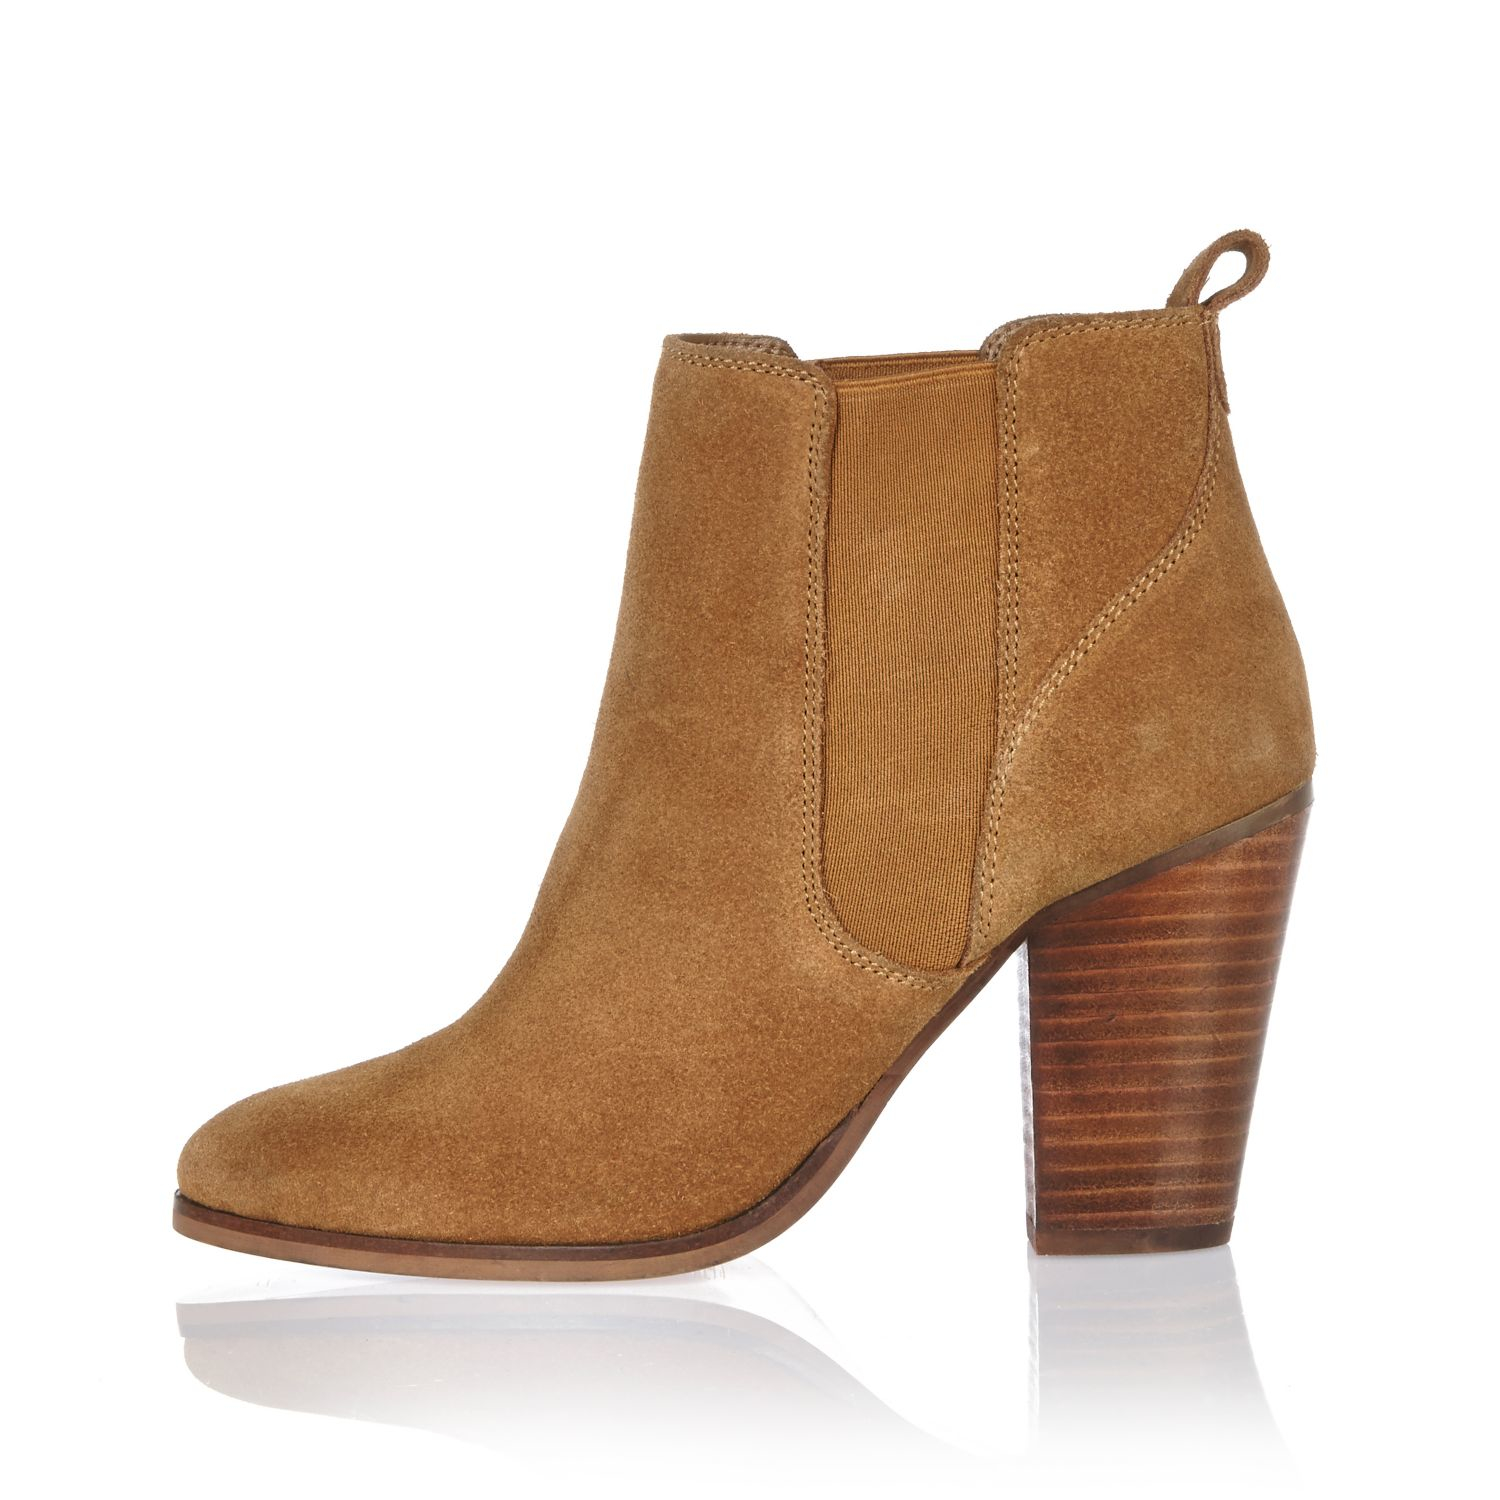 River Island Tan Suede Heeled Ankle Boots in Brown | Lyst